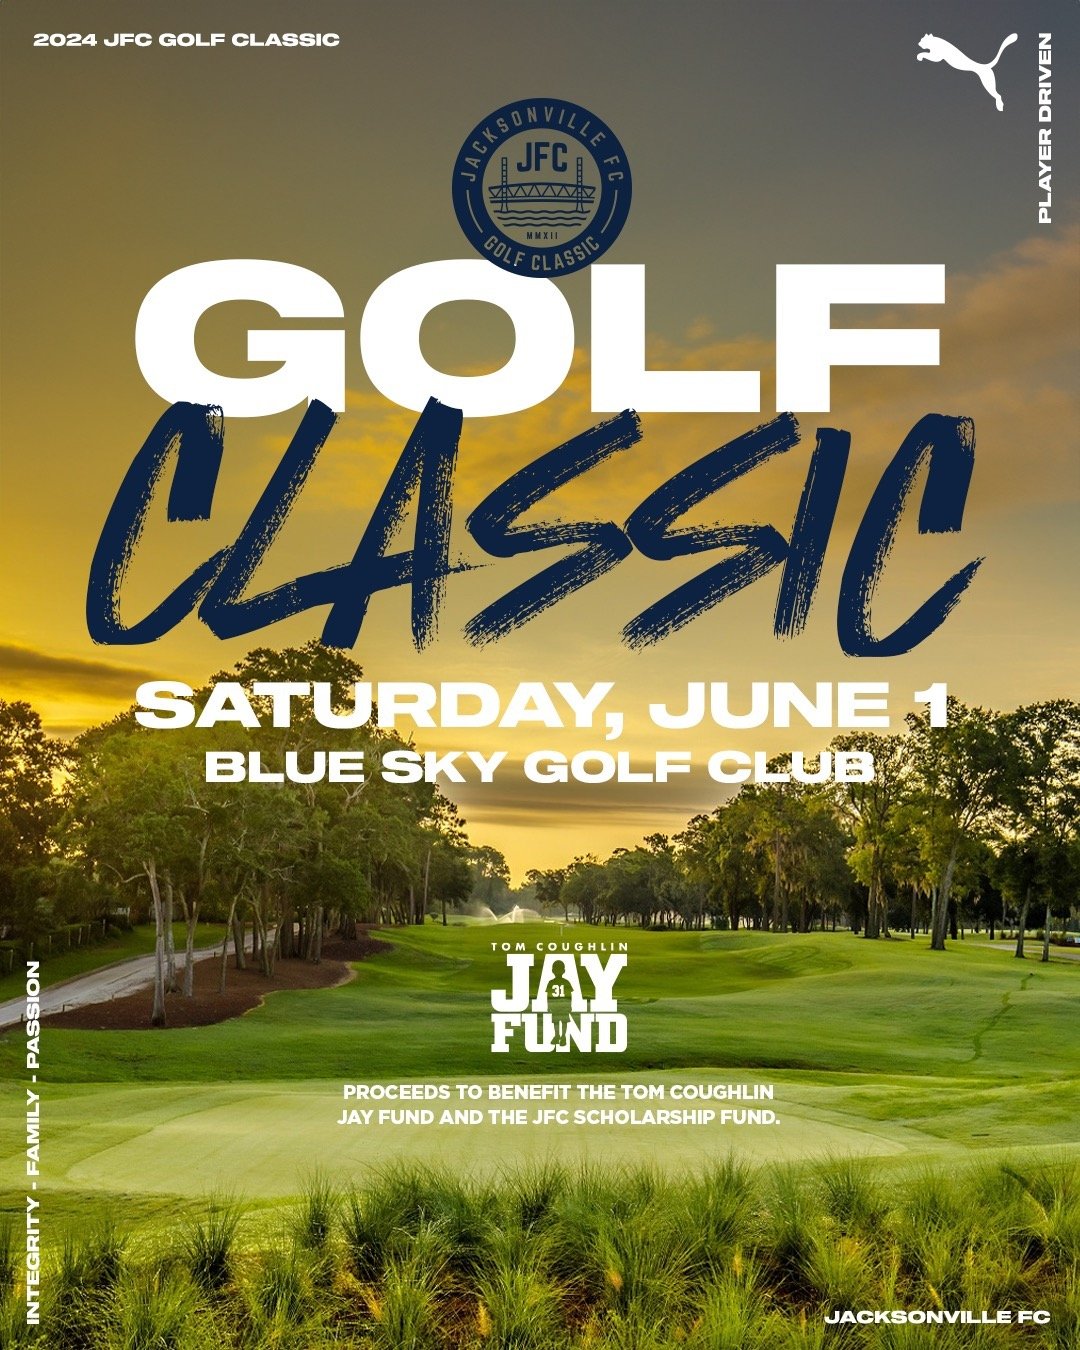 Foursomes are filling up fast!!!

Join us for The 2024 Jacksonville FC Golf Classic on June 1st at Blue Sky Golf Club.

Your participation will benefit two important causes: the Tom Coughlin Jay Fund Foundation and the JFC Scholarship Fund.

Sign up 